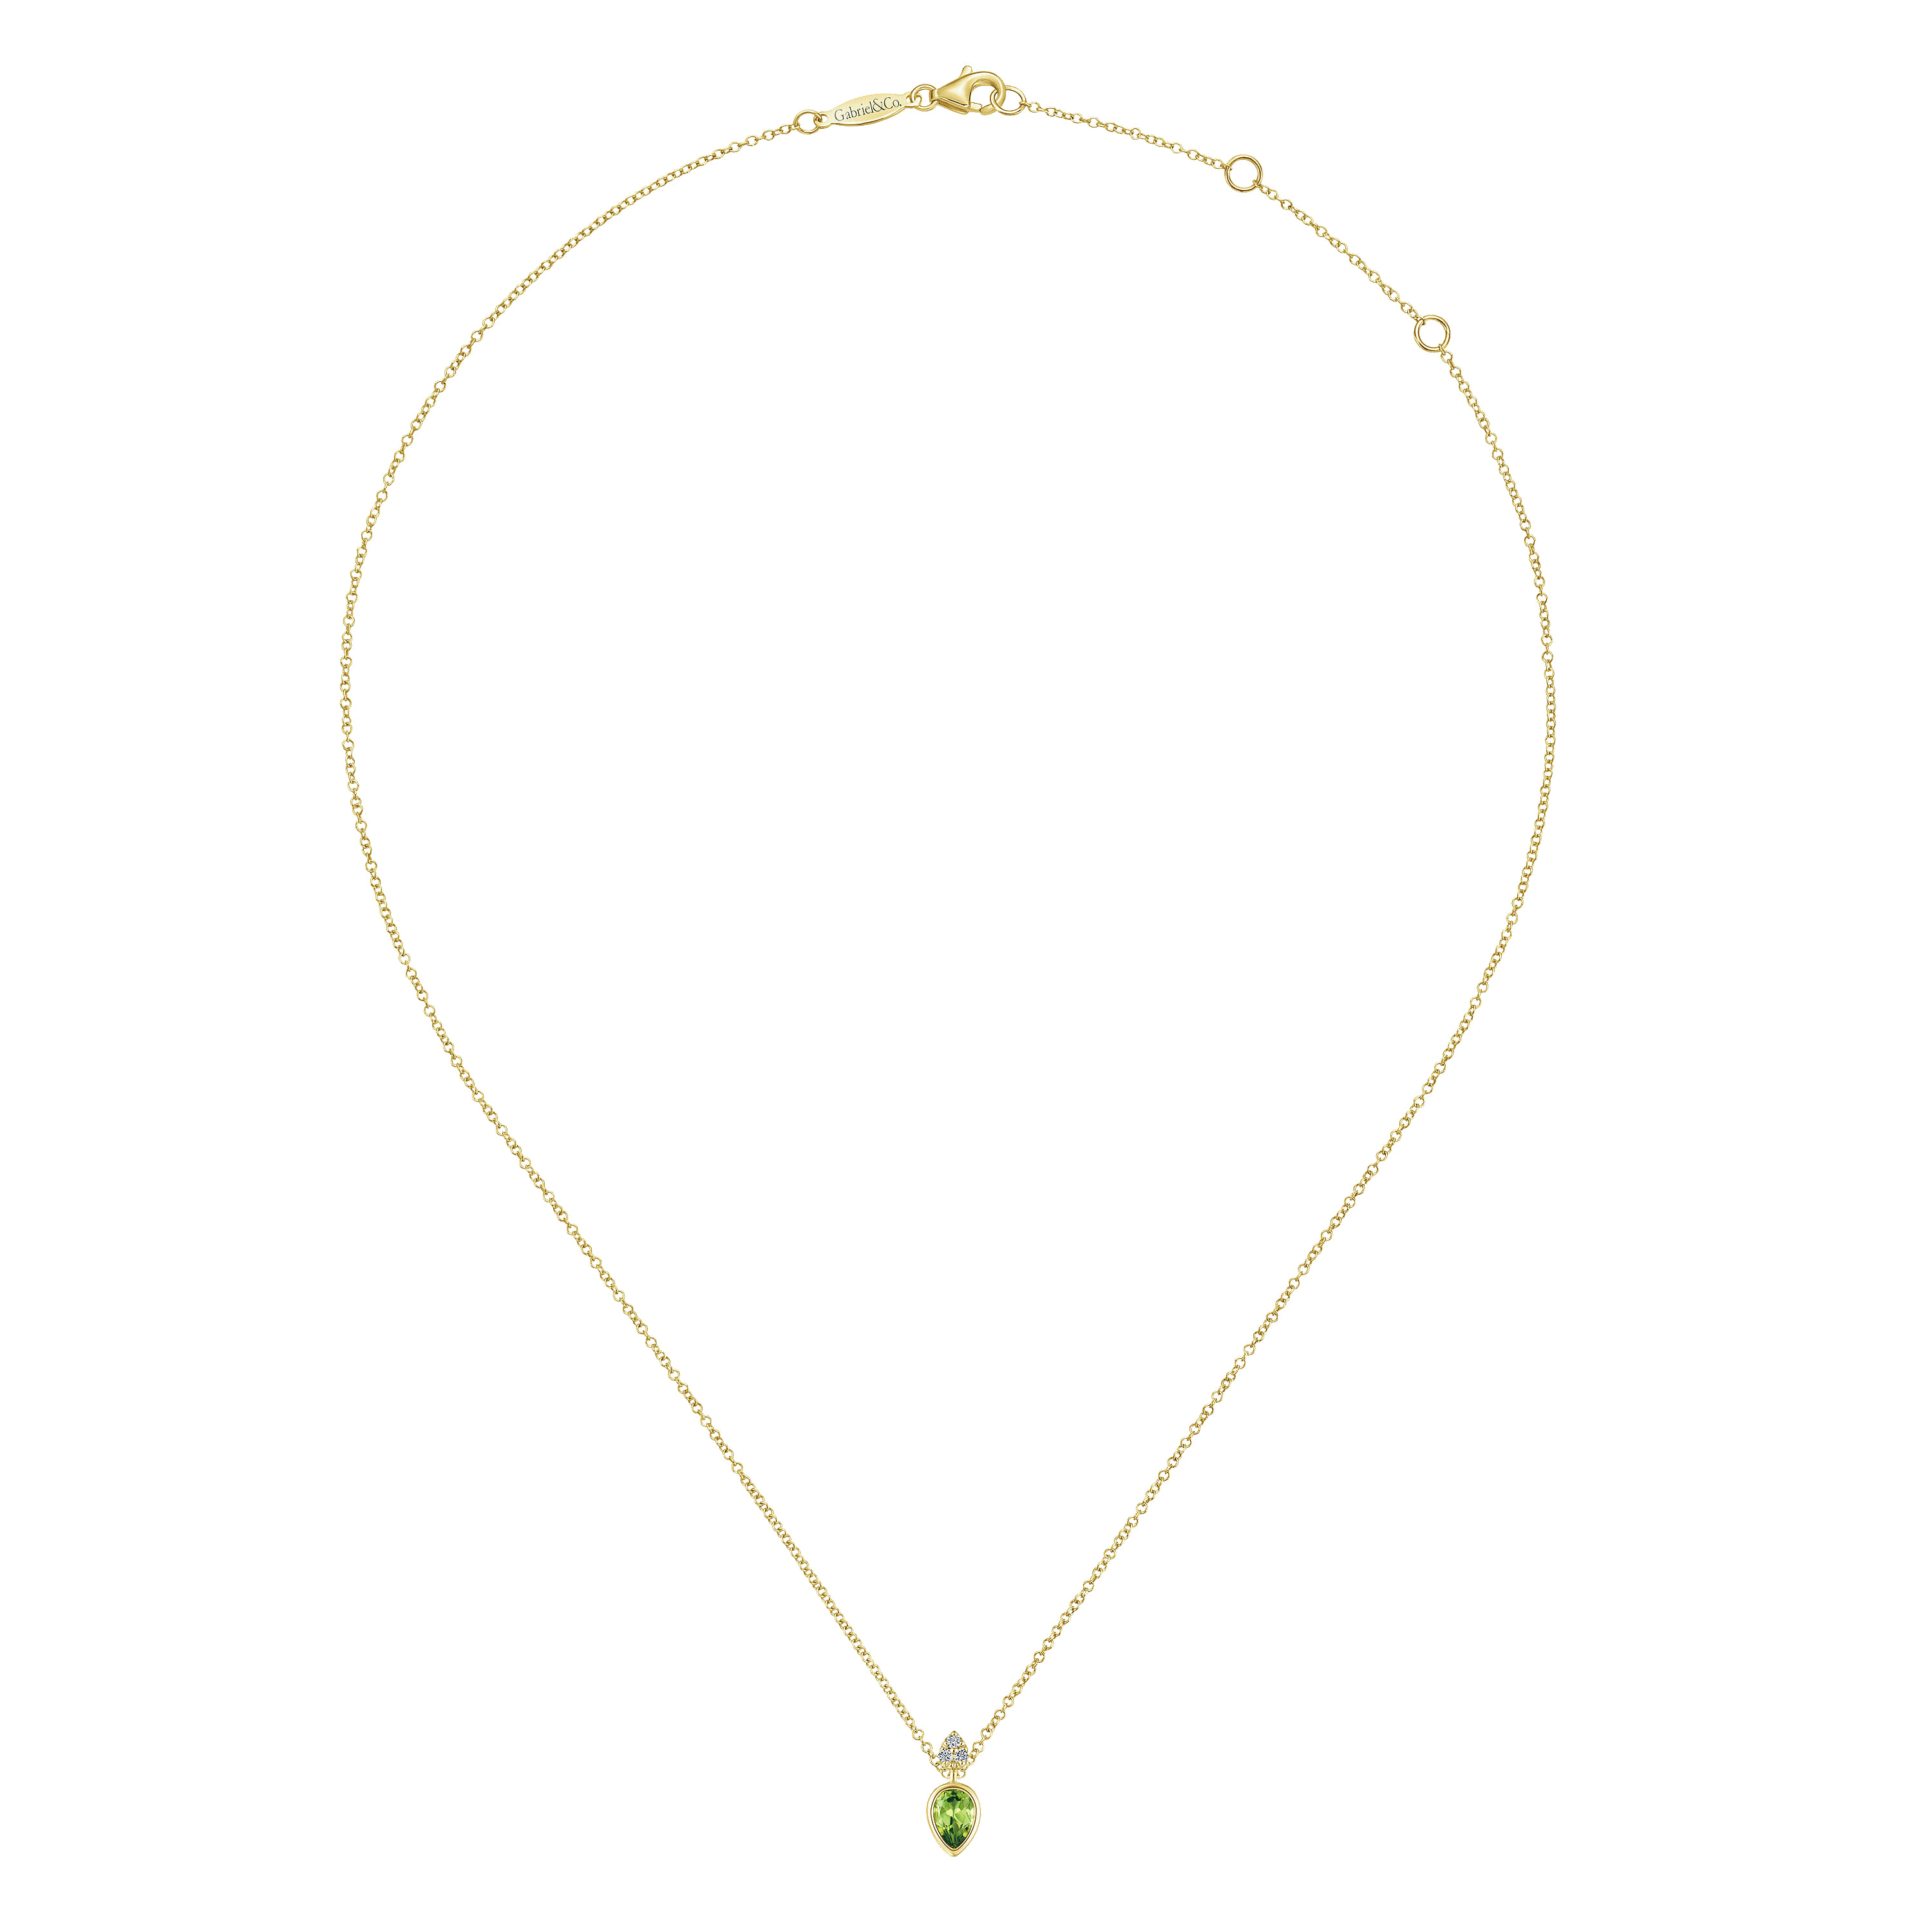 14K Yellow Gold Pear Shape Peridot Pendant Necklace with Diamond Accents